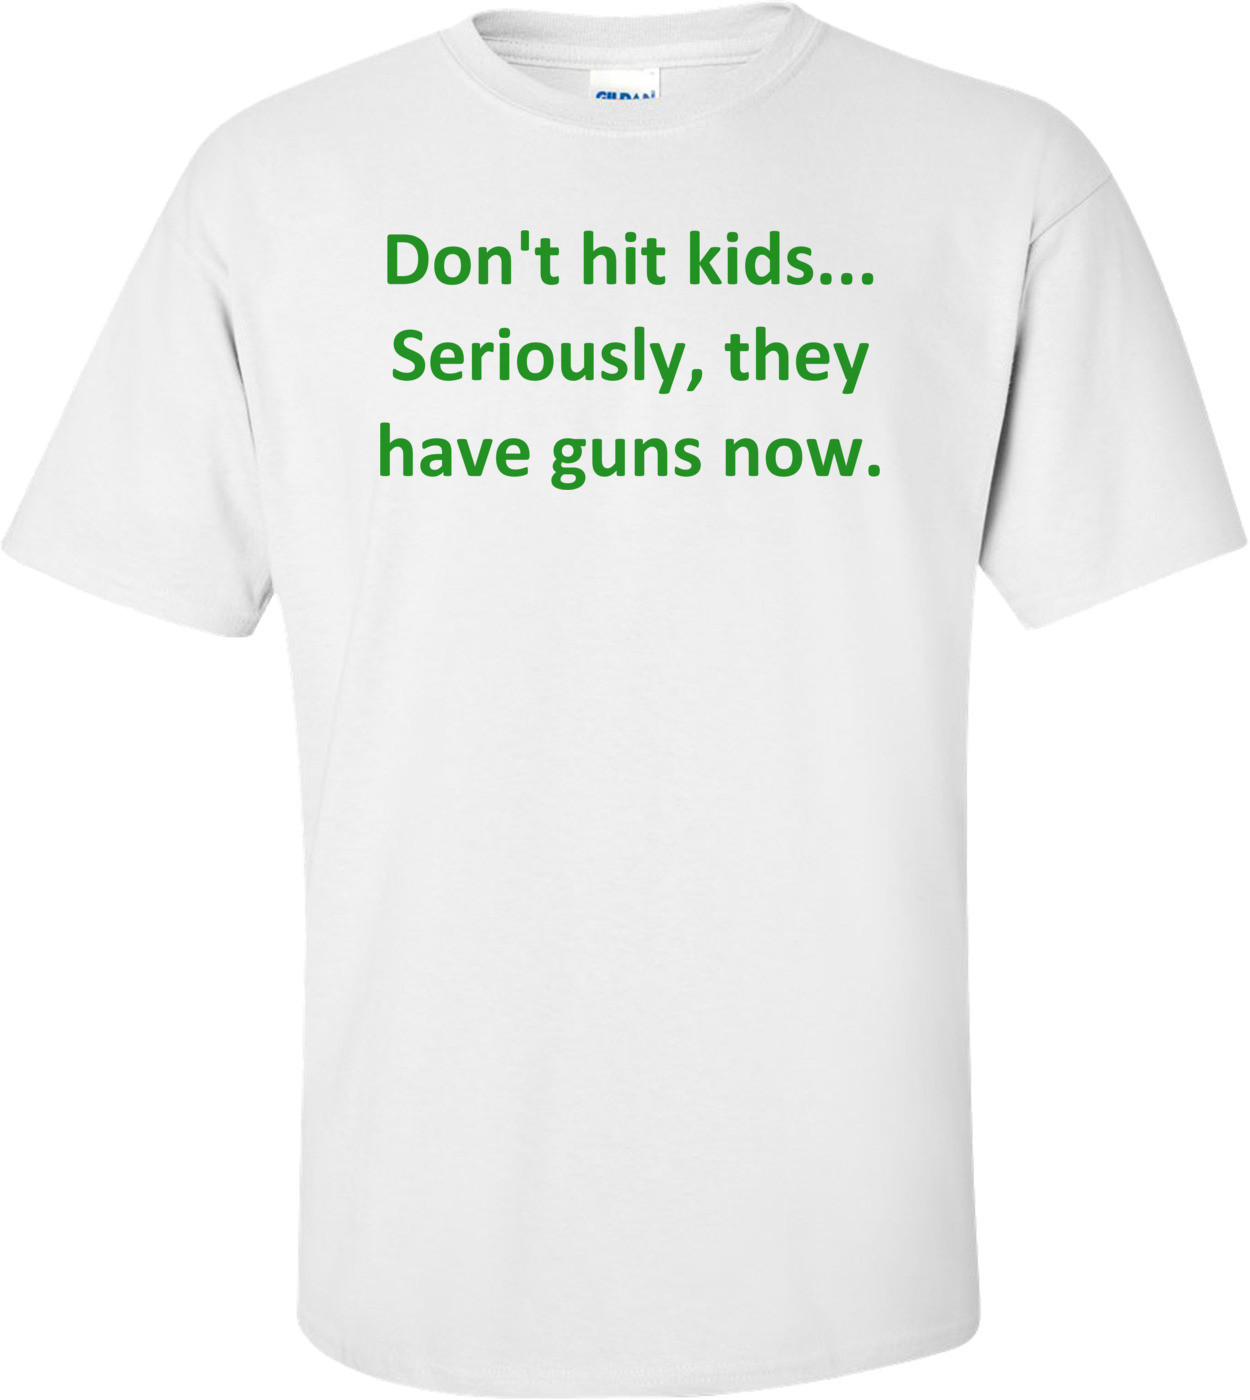 Don't hit kids... Seriously, they have guns now. Shirt